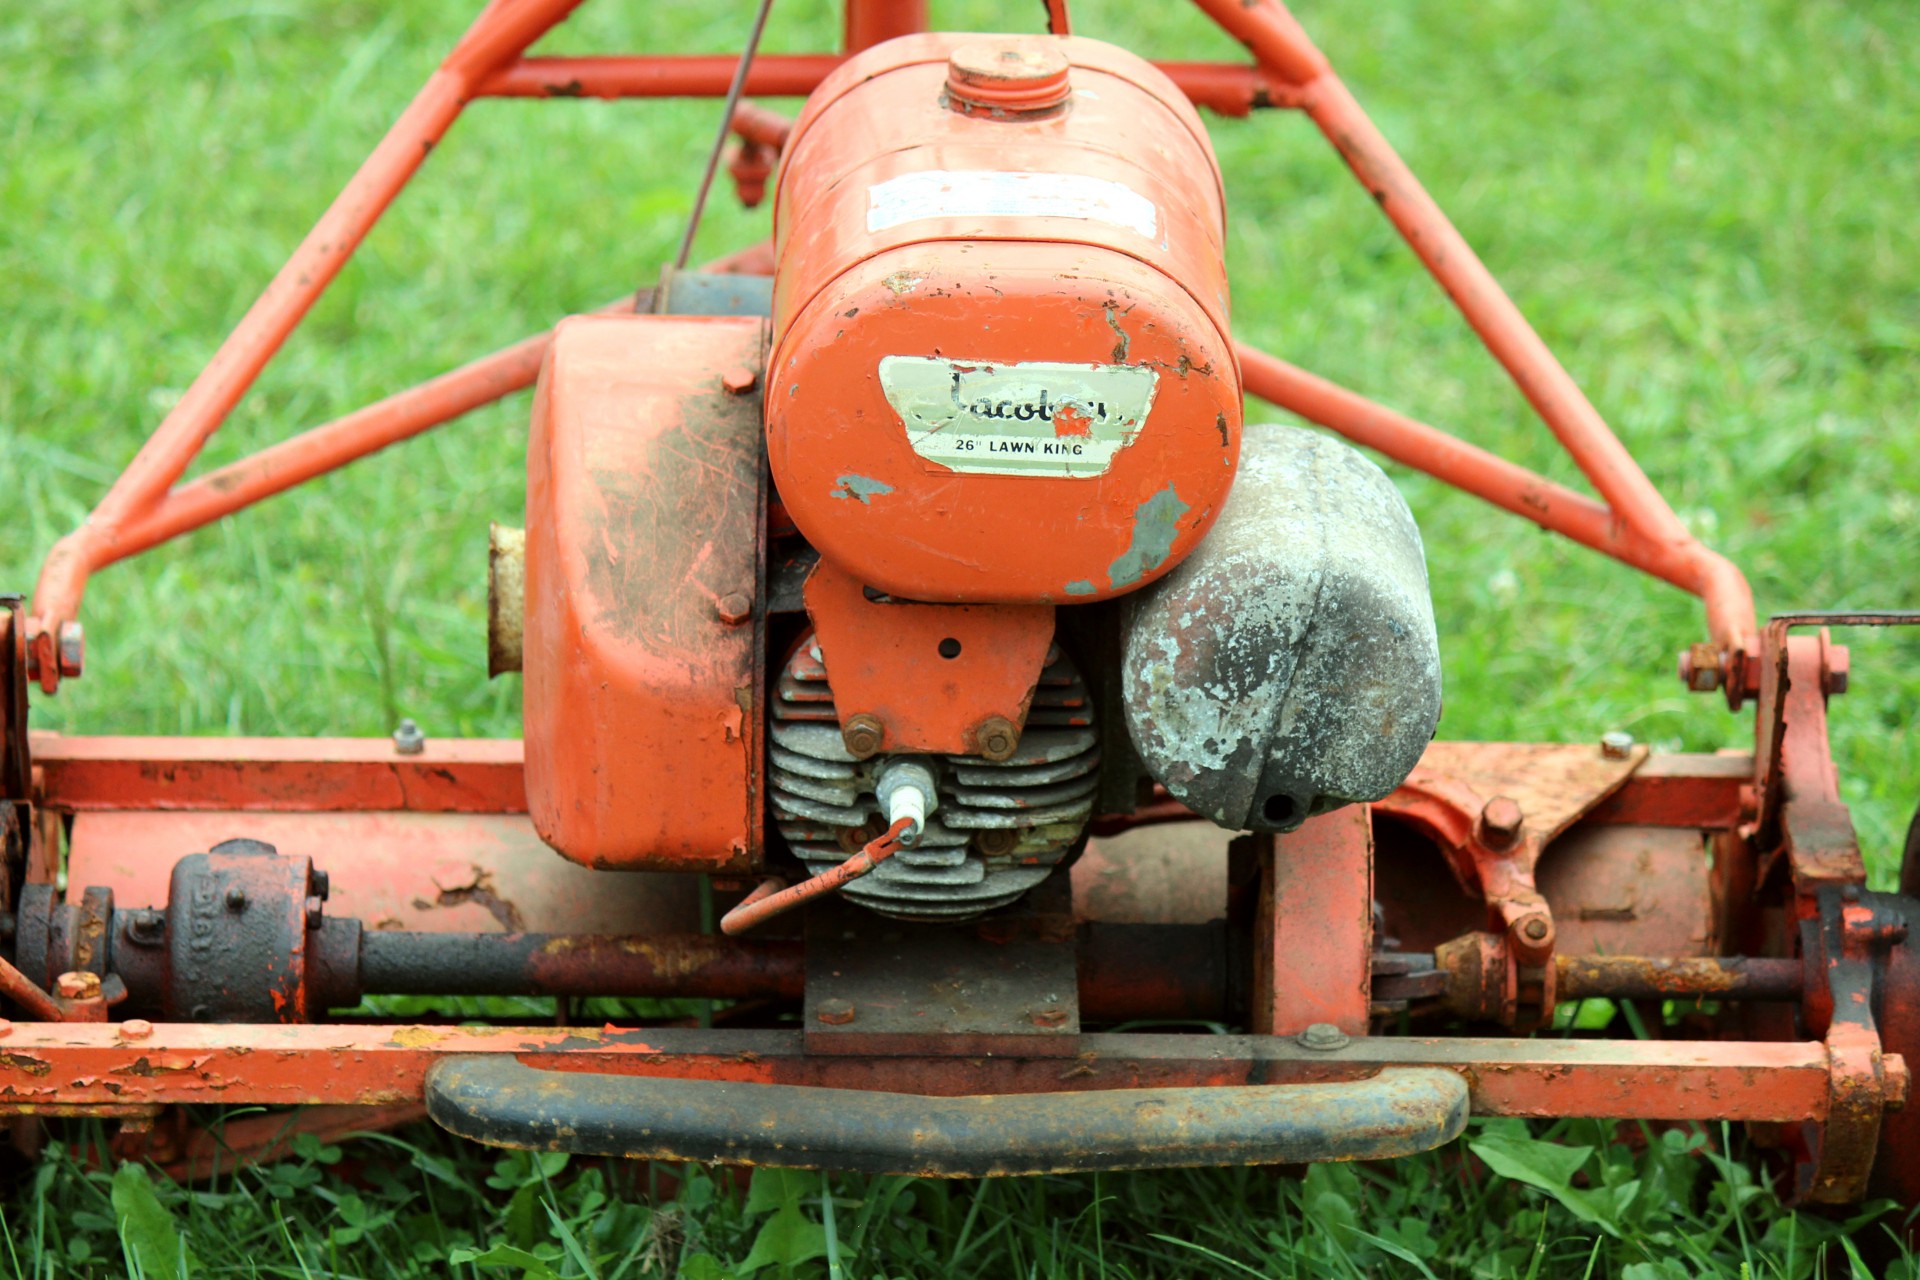 Old worn out lawnmower